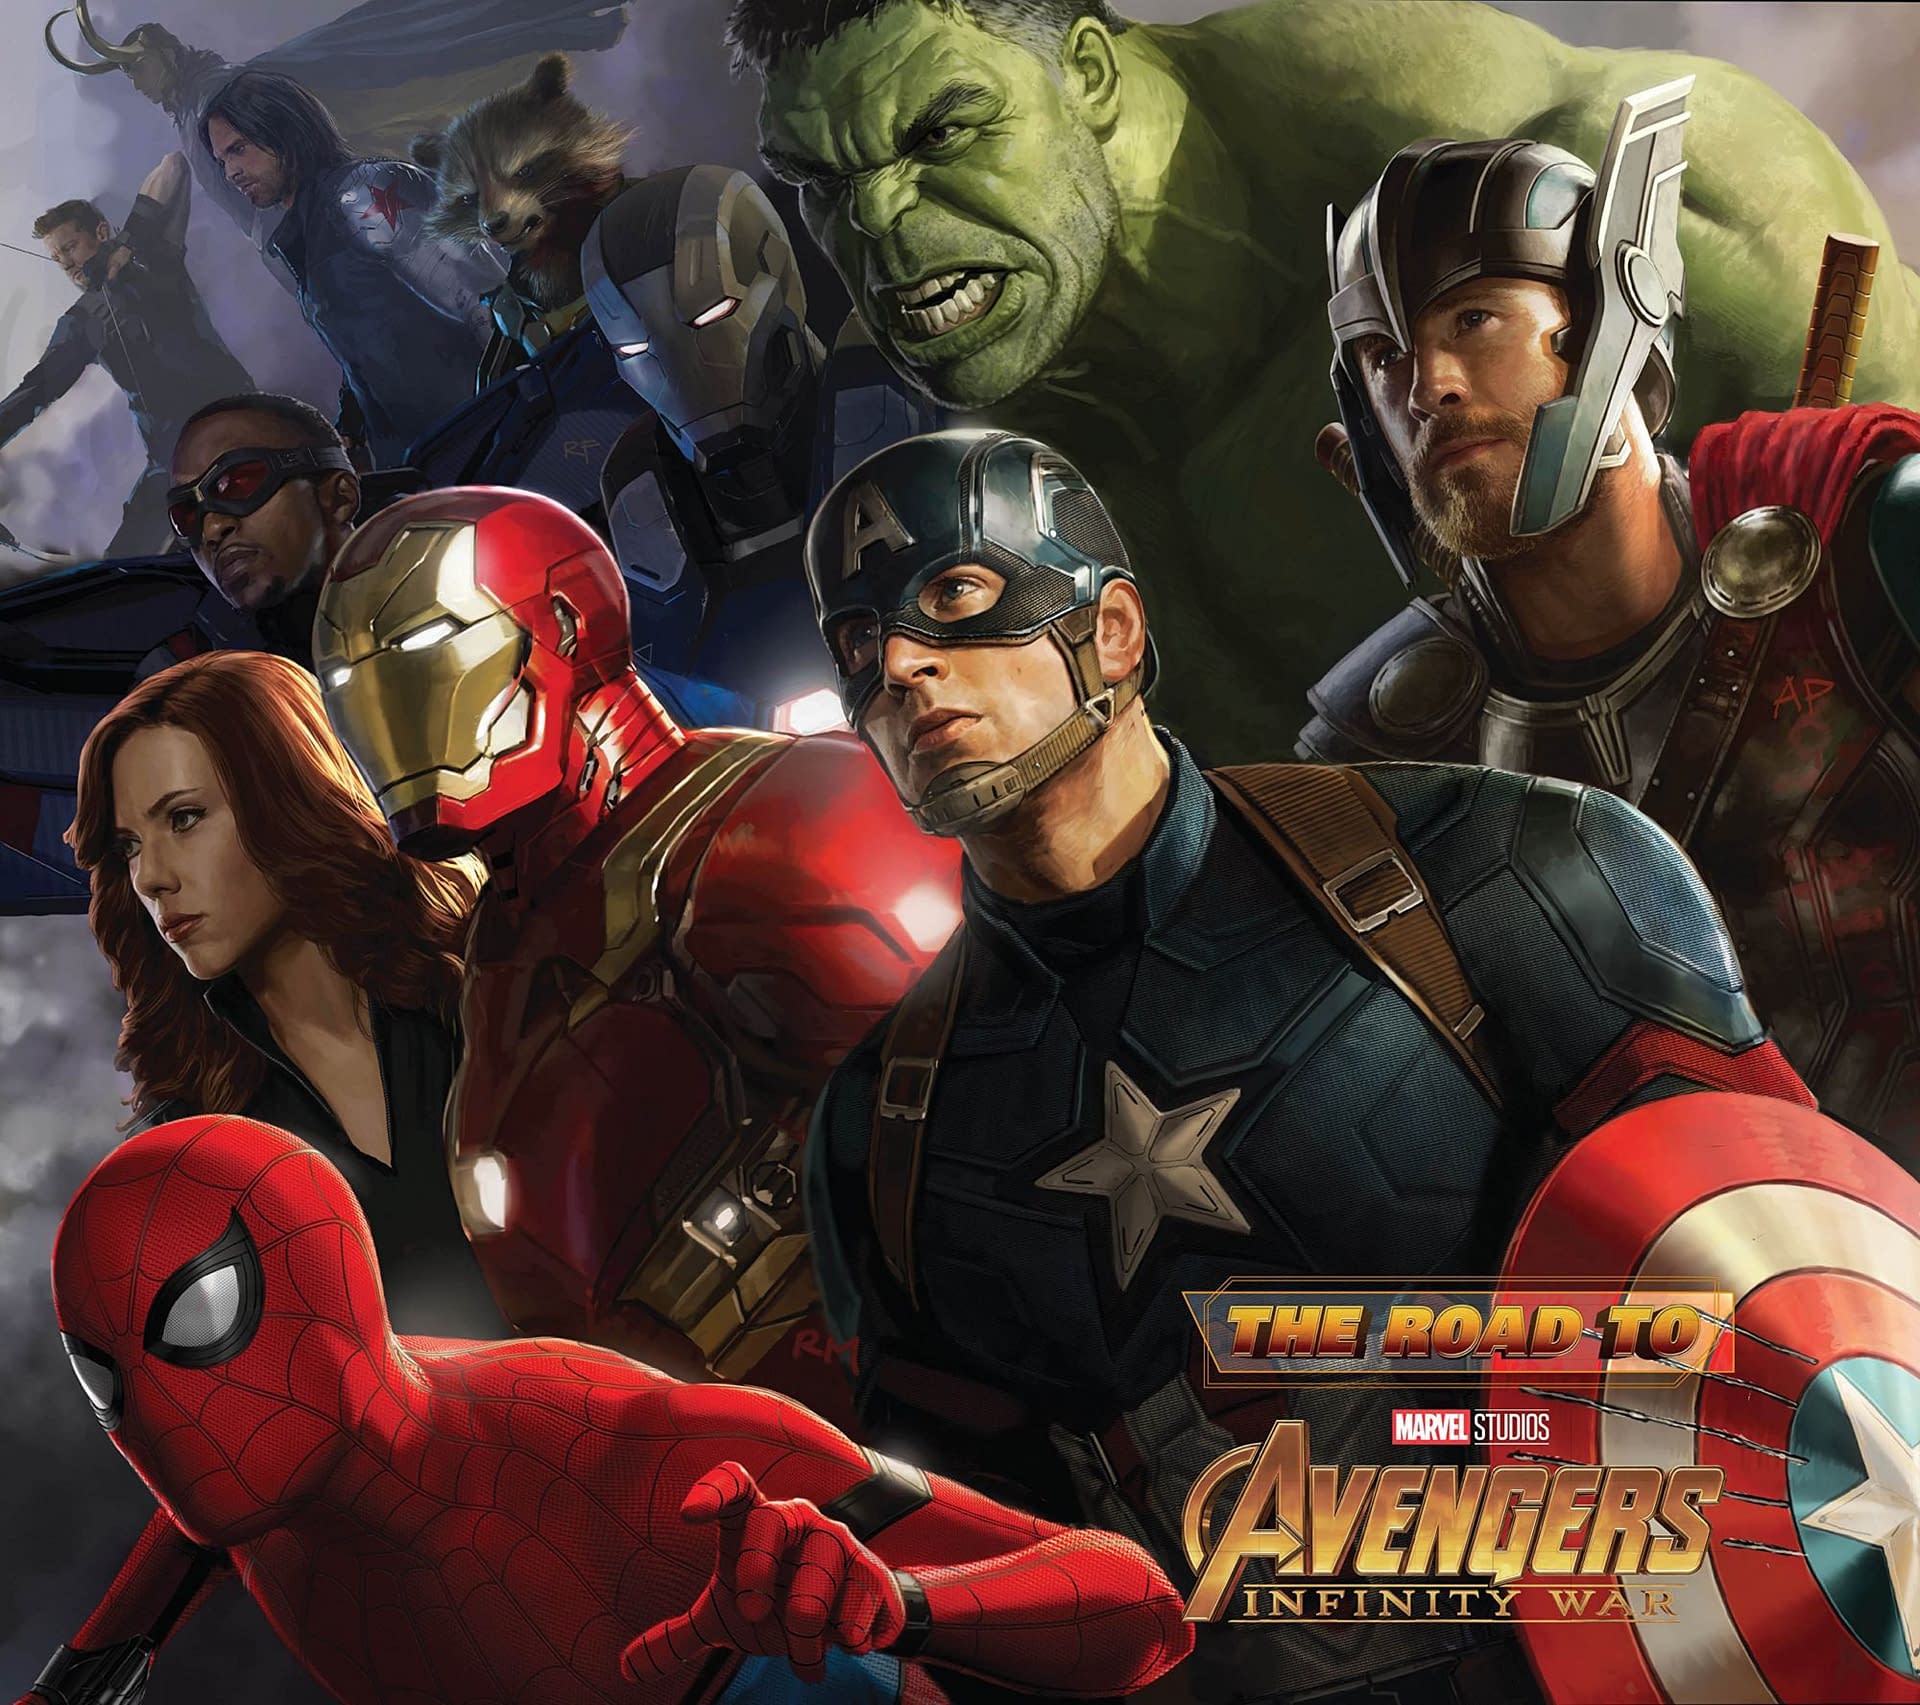 A Short Avengers: Infinity War Promo and the Cover of the New Art Book